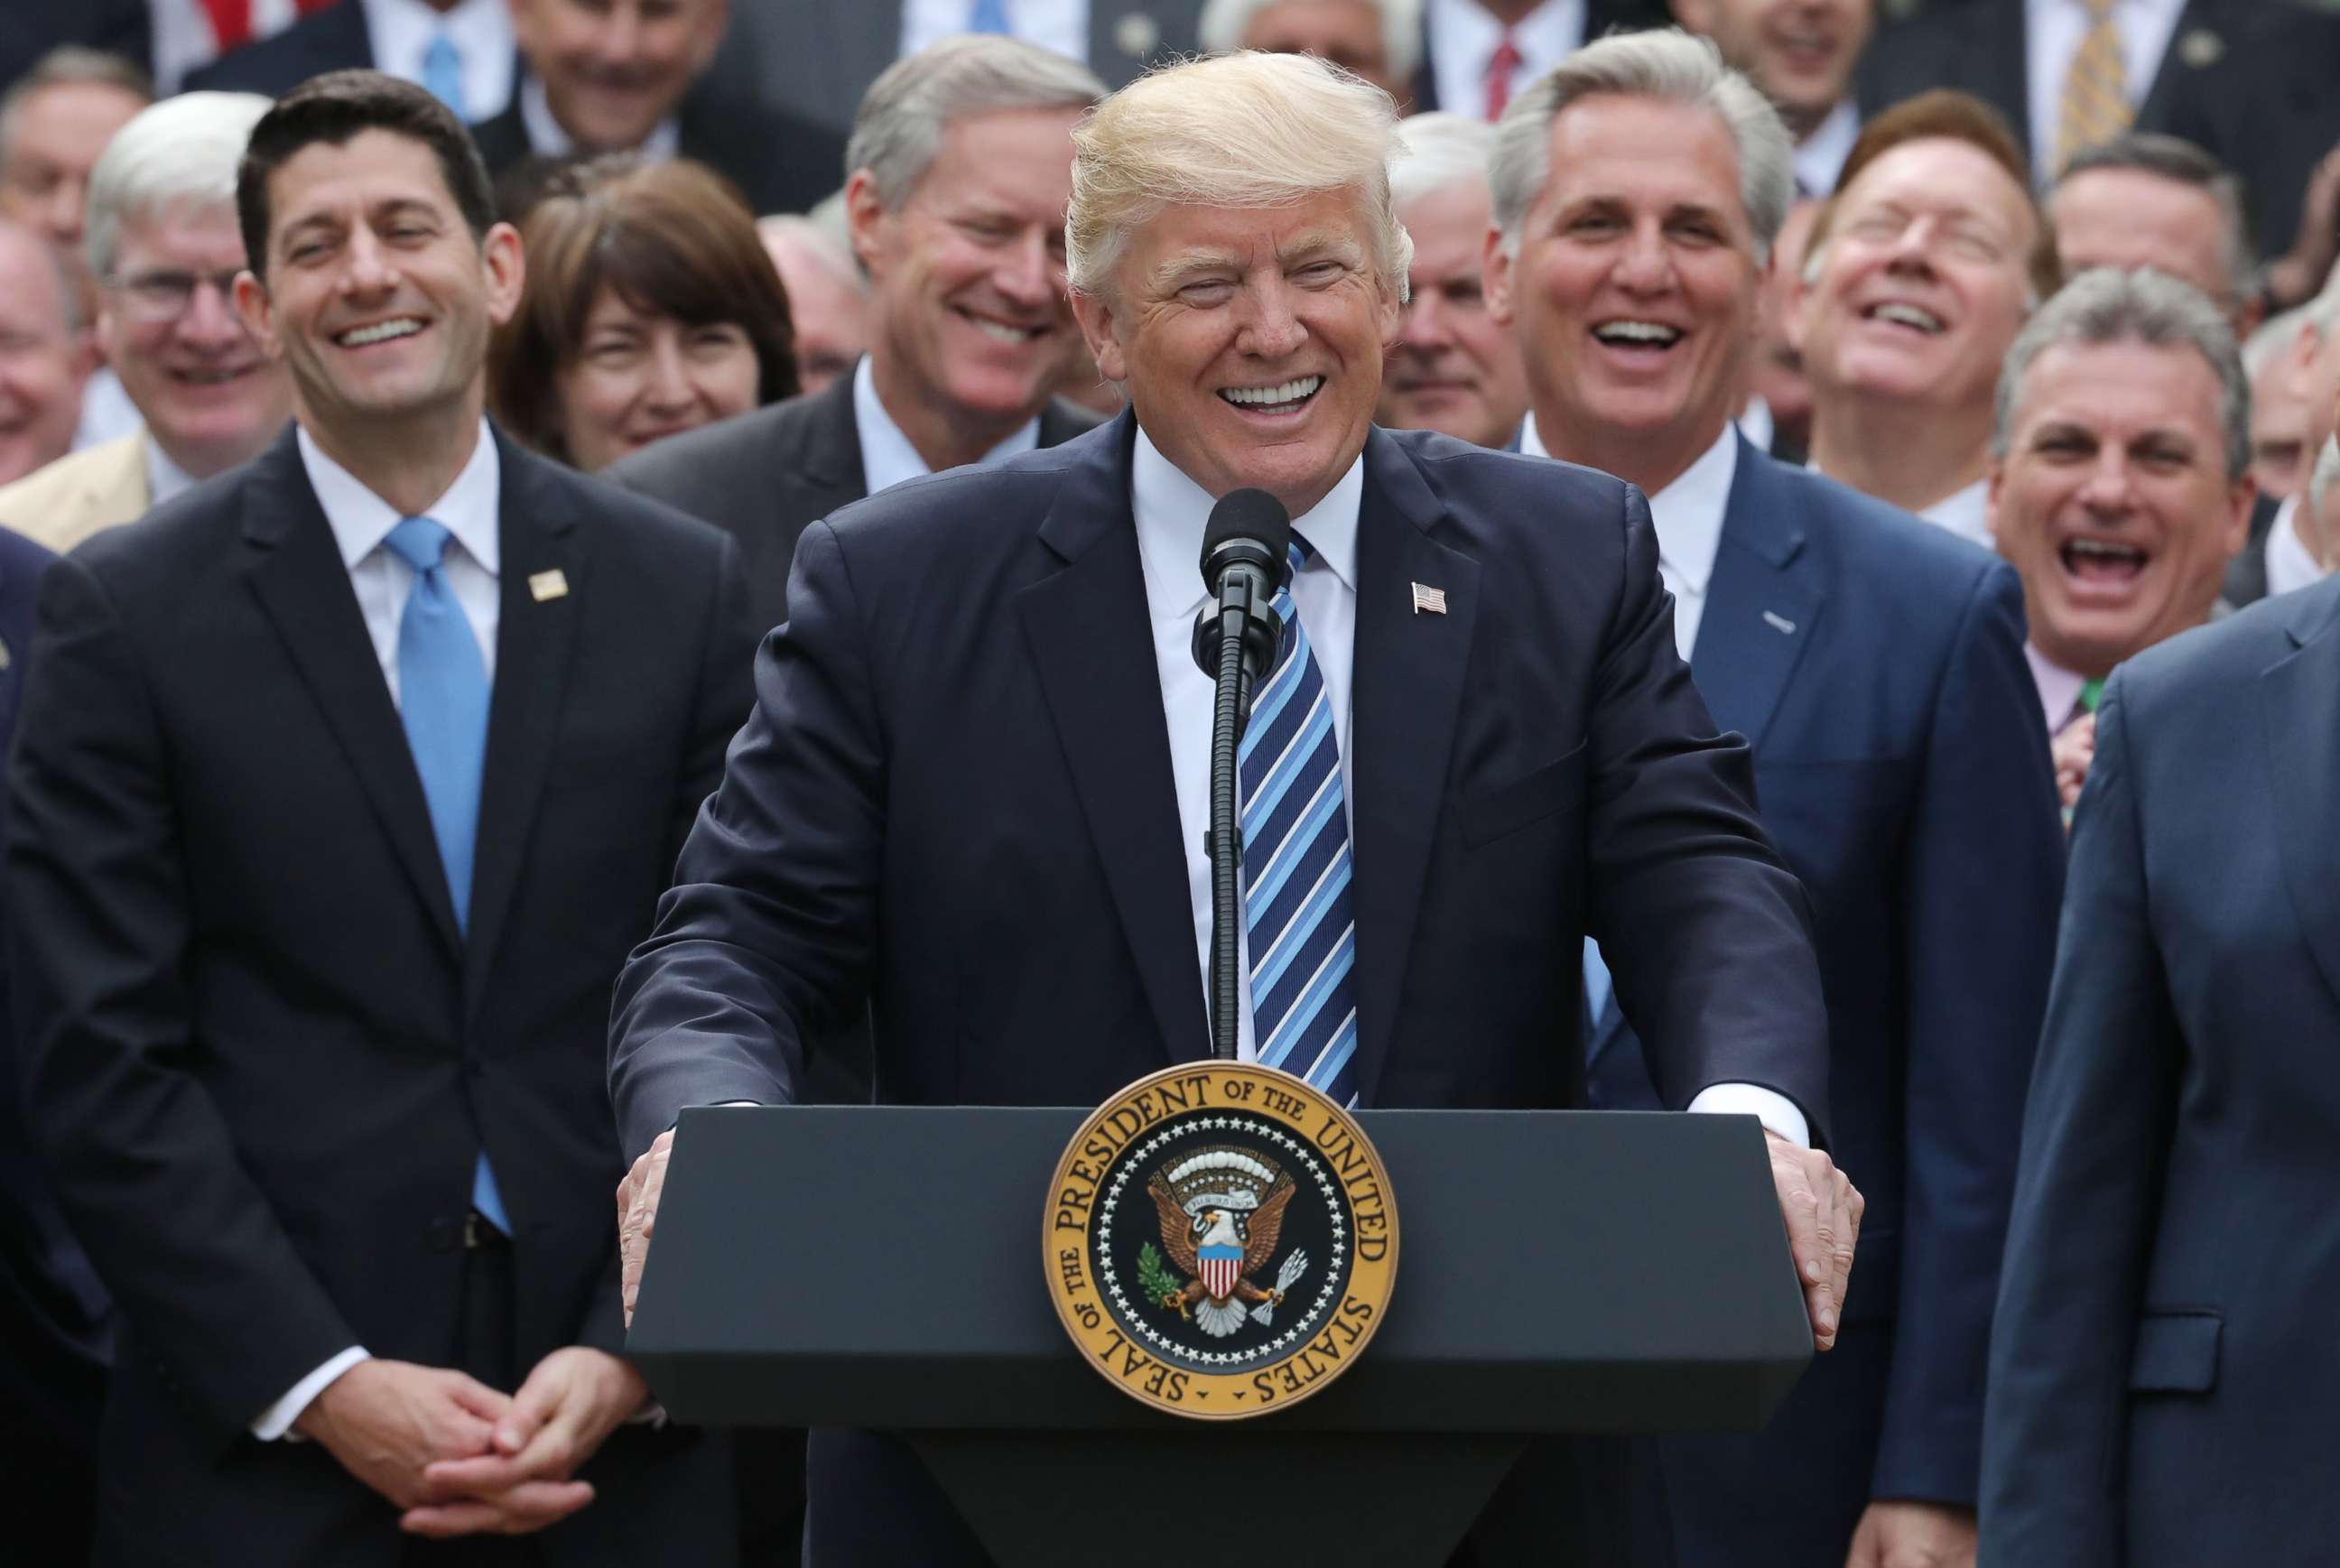 PHOTO: President Donald Trump celebrates with Congressional Republicans in the Rose Garden of the White House.